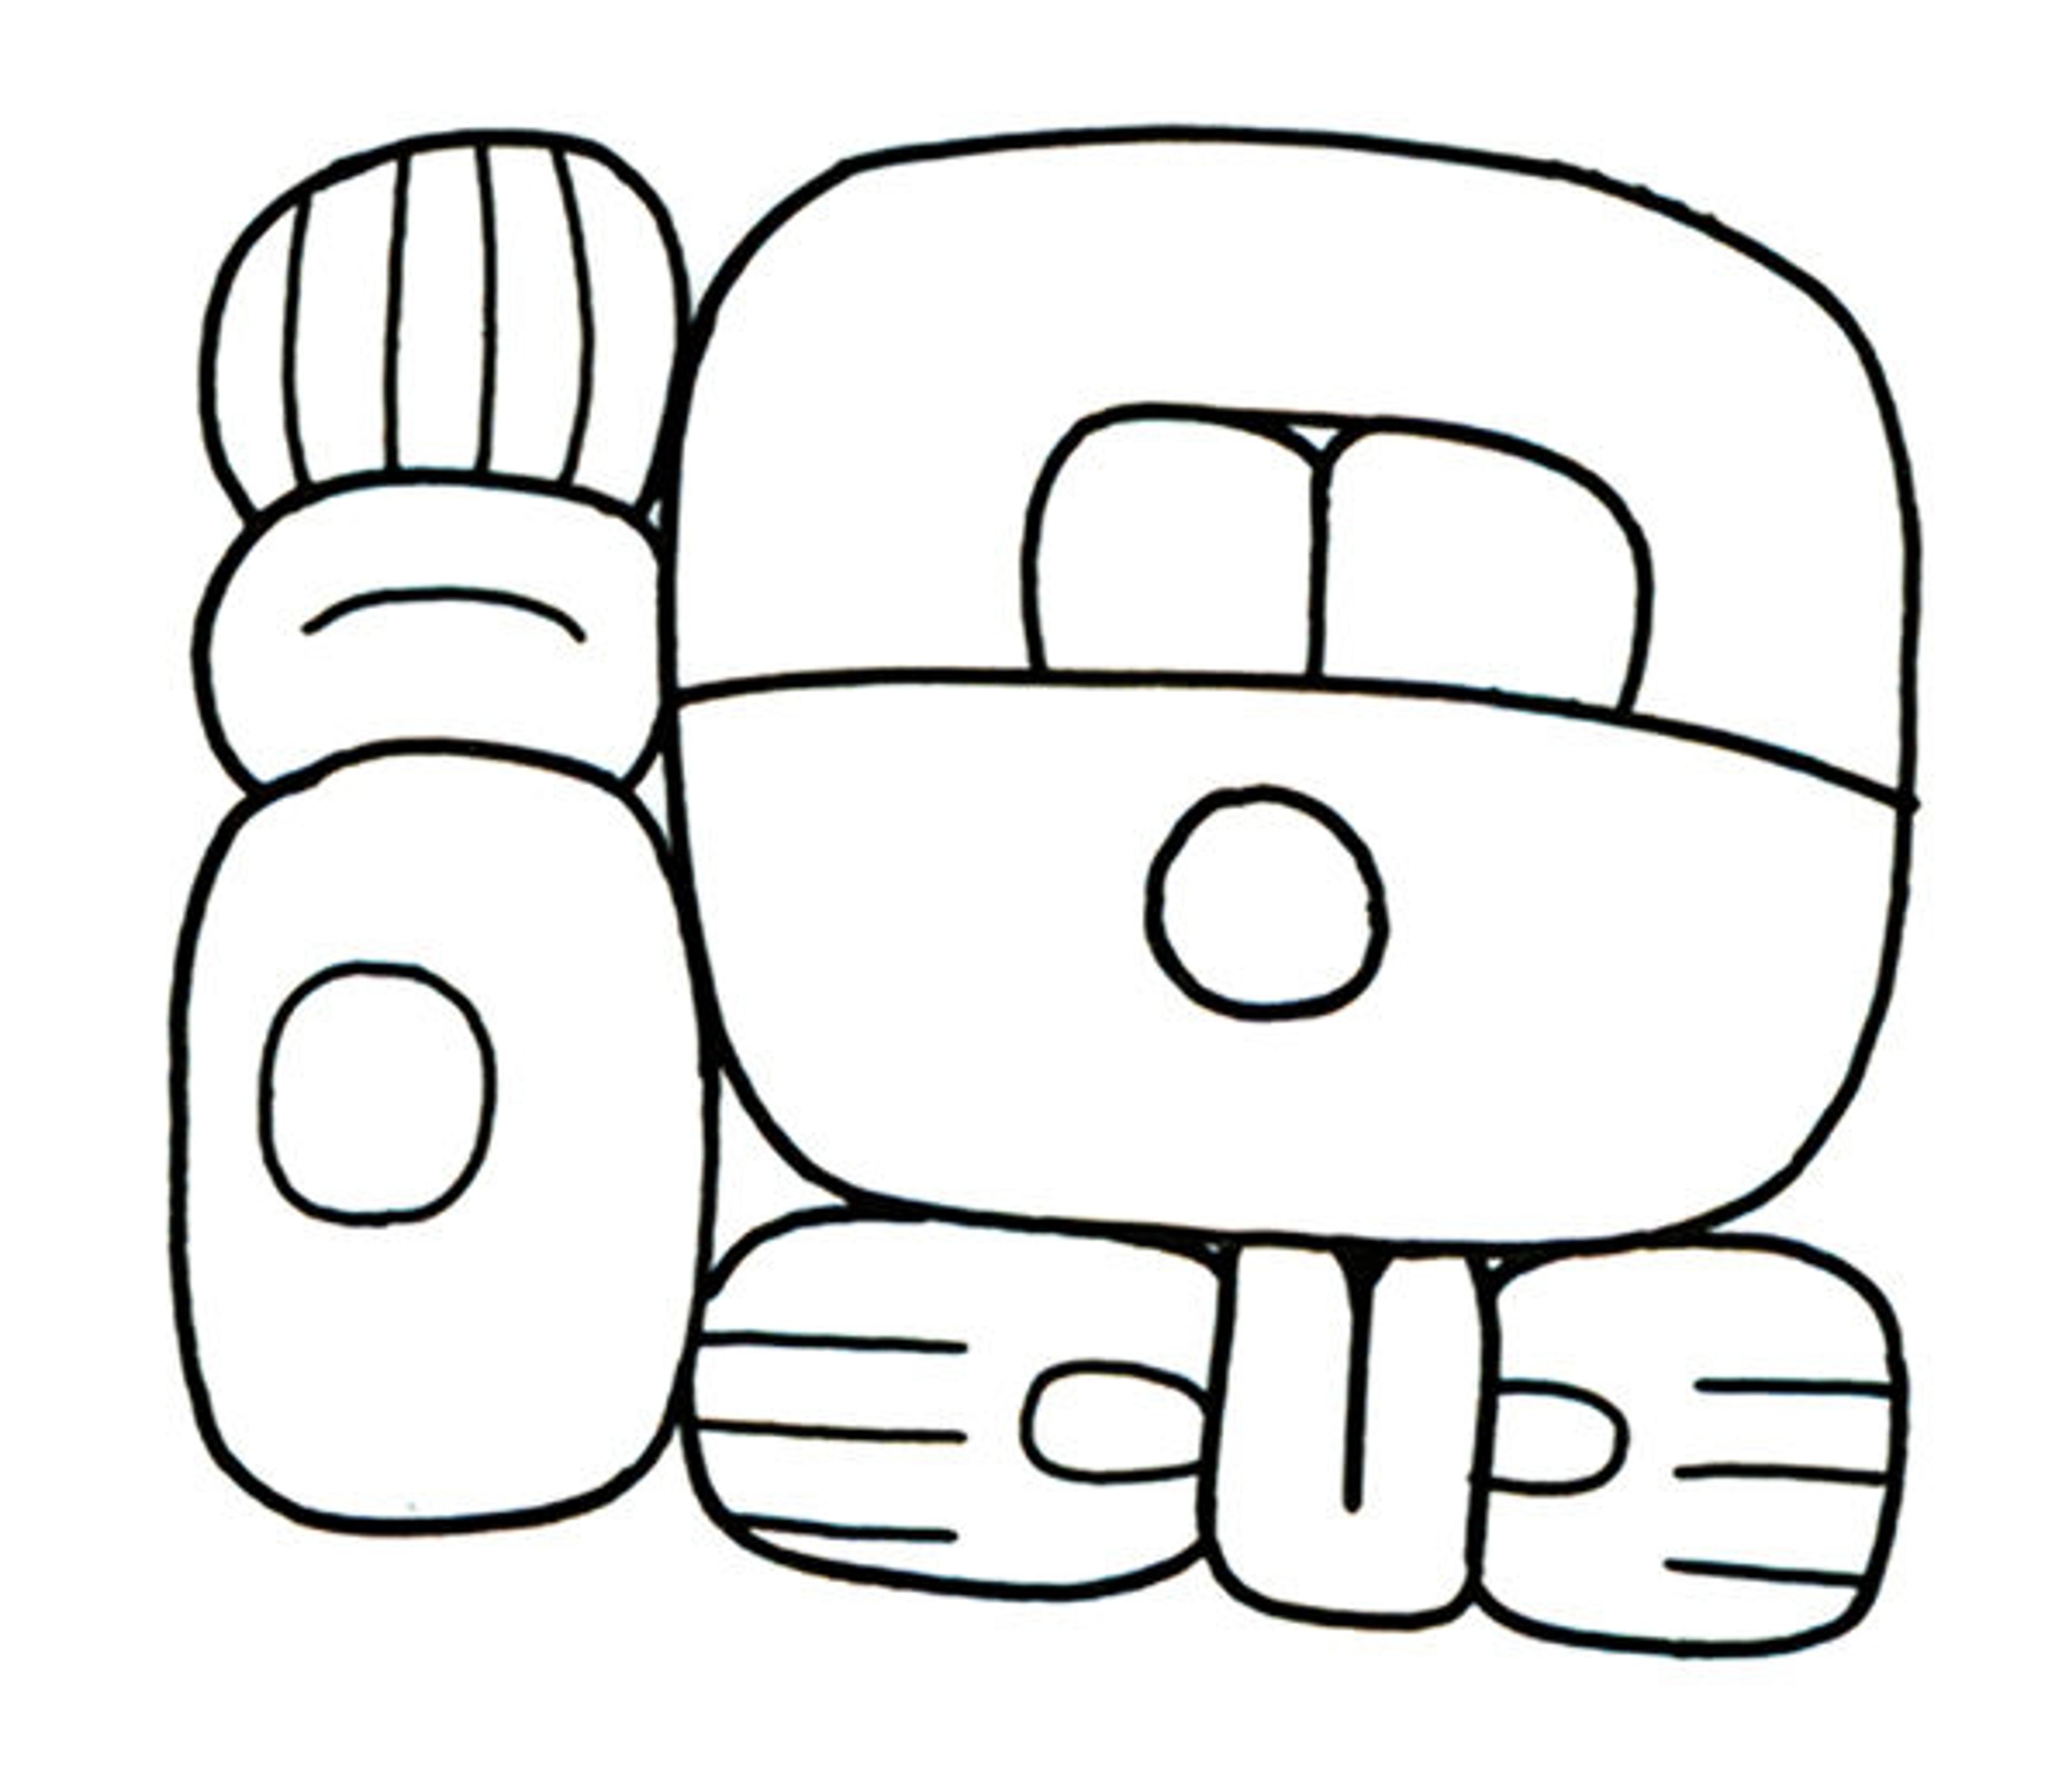 Fig. 2. Ti-lo-ma, or Tiloom, the name of the La Pasadita provincial ruler from the program of lintel sculptures. Drawing by Peter Mathews